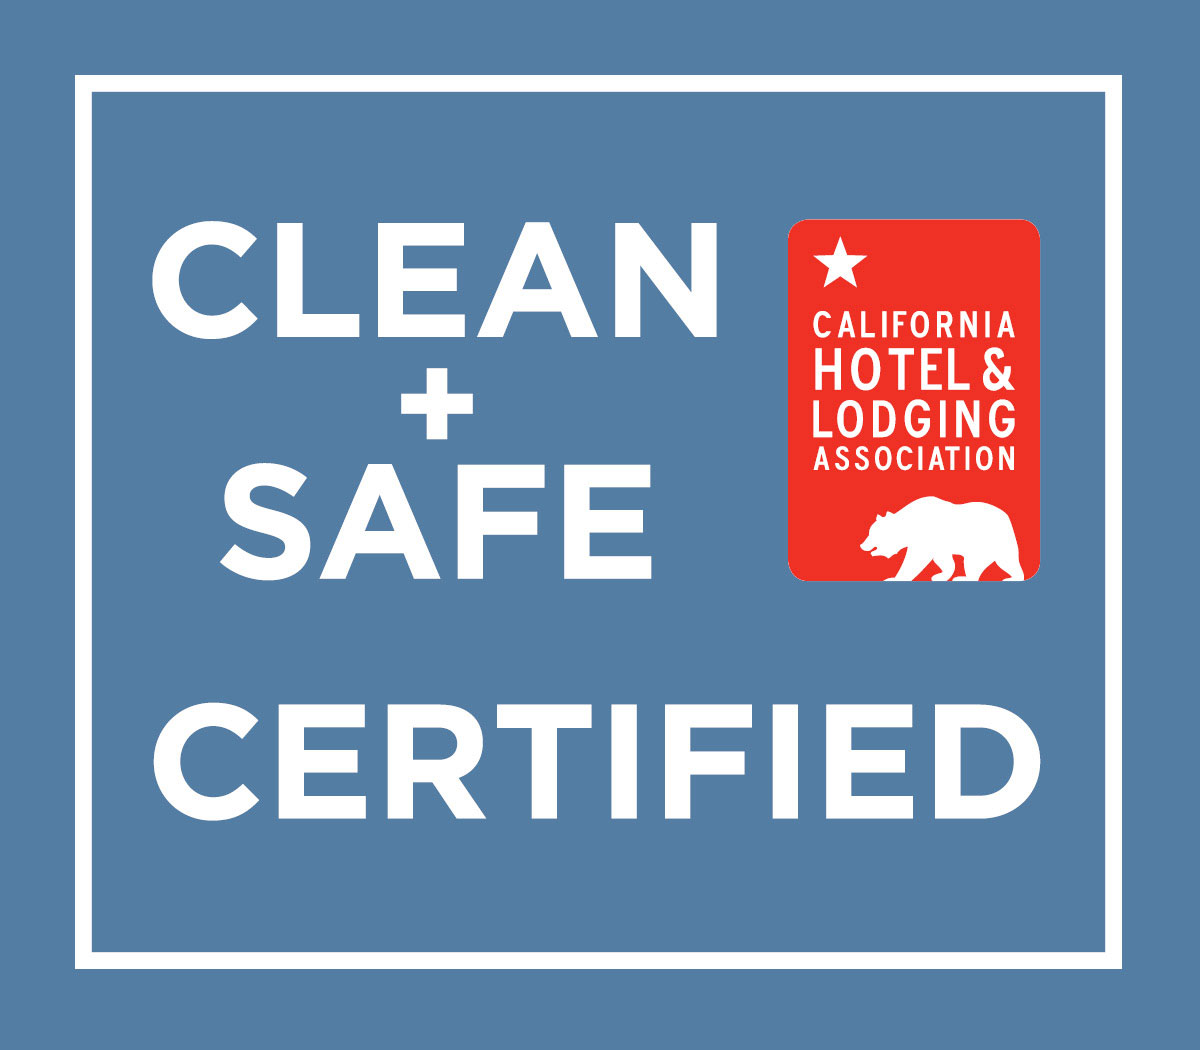 Our Berkley Hotel is CHLA Clean + Safe Certified